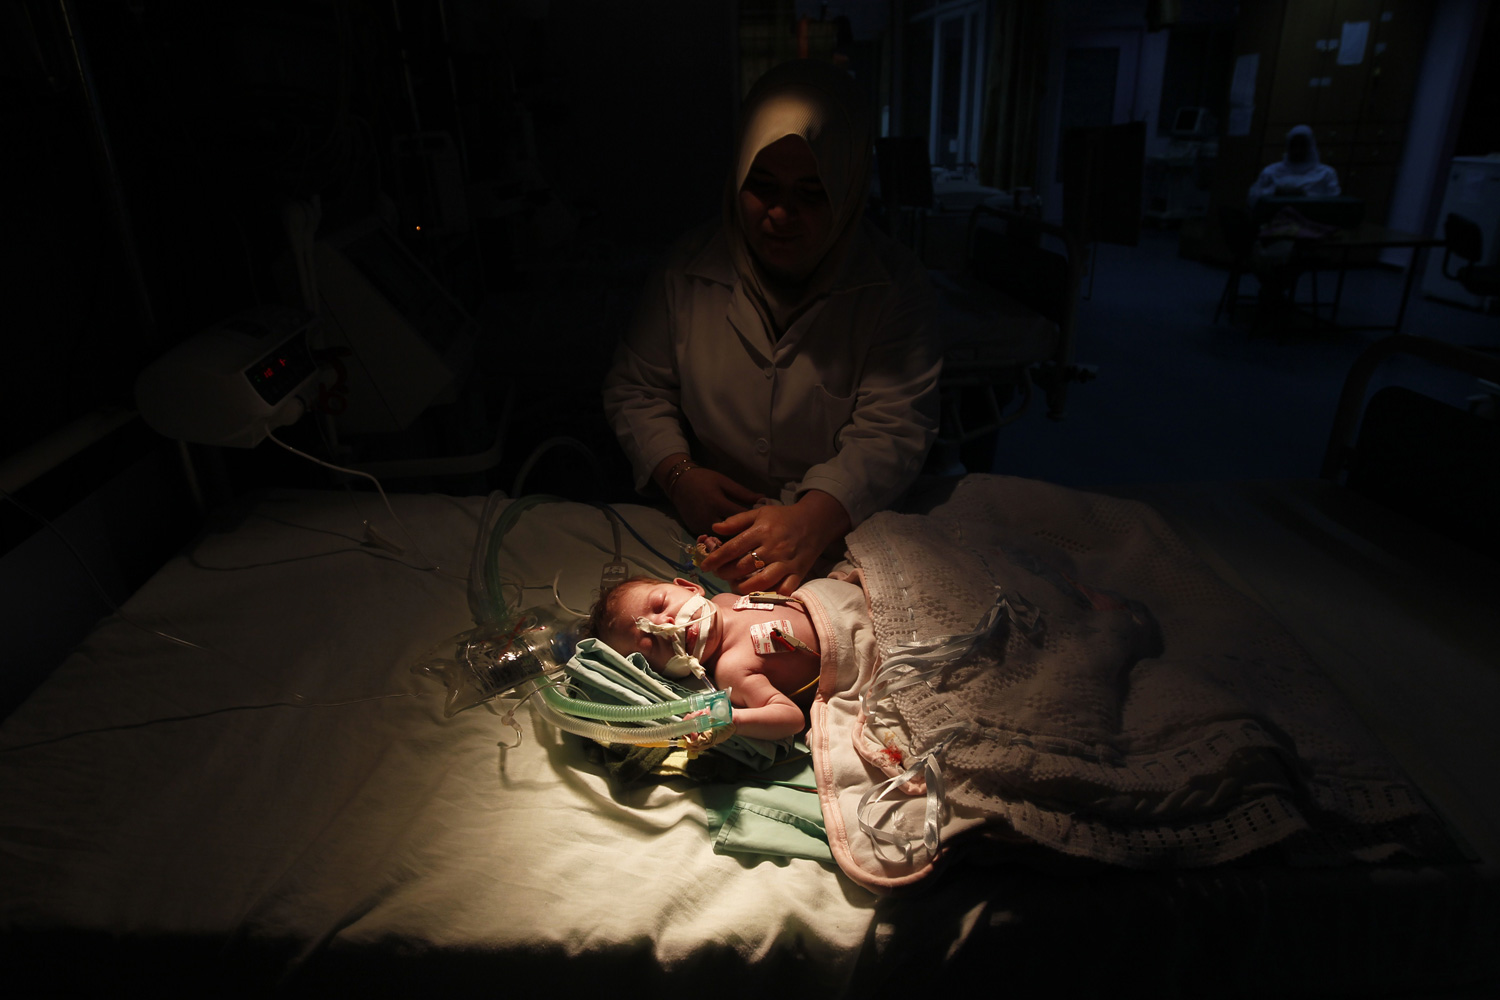 March 27, 2012. A Palestinian baby receives treatment at the intensive care unit at a hospital where they are using generators to maintain medical support units in Gaza City.